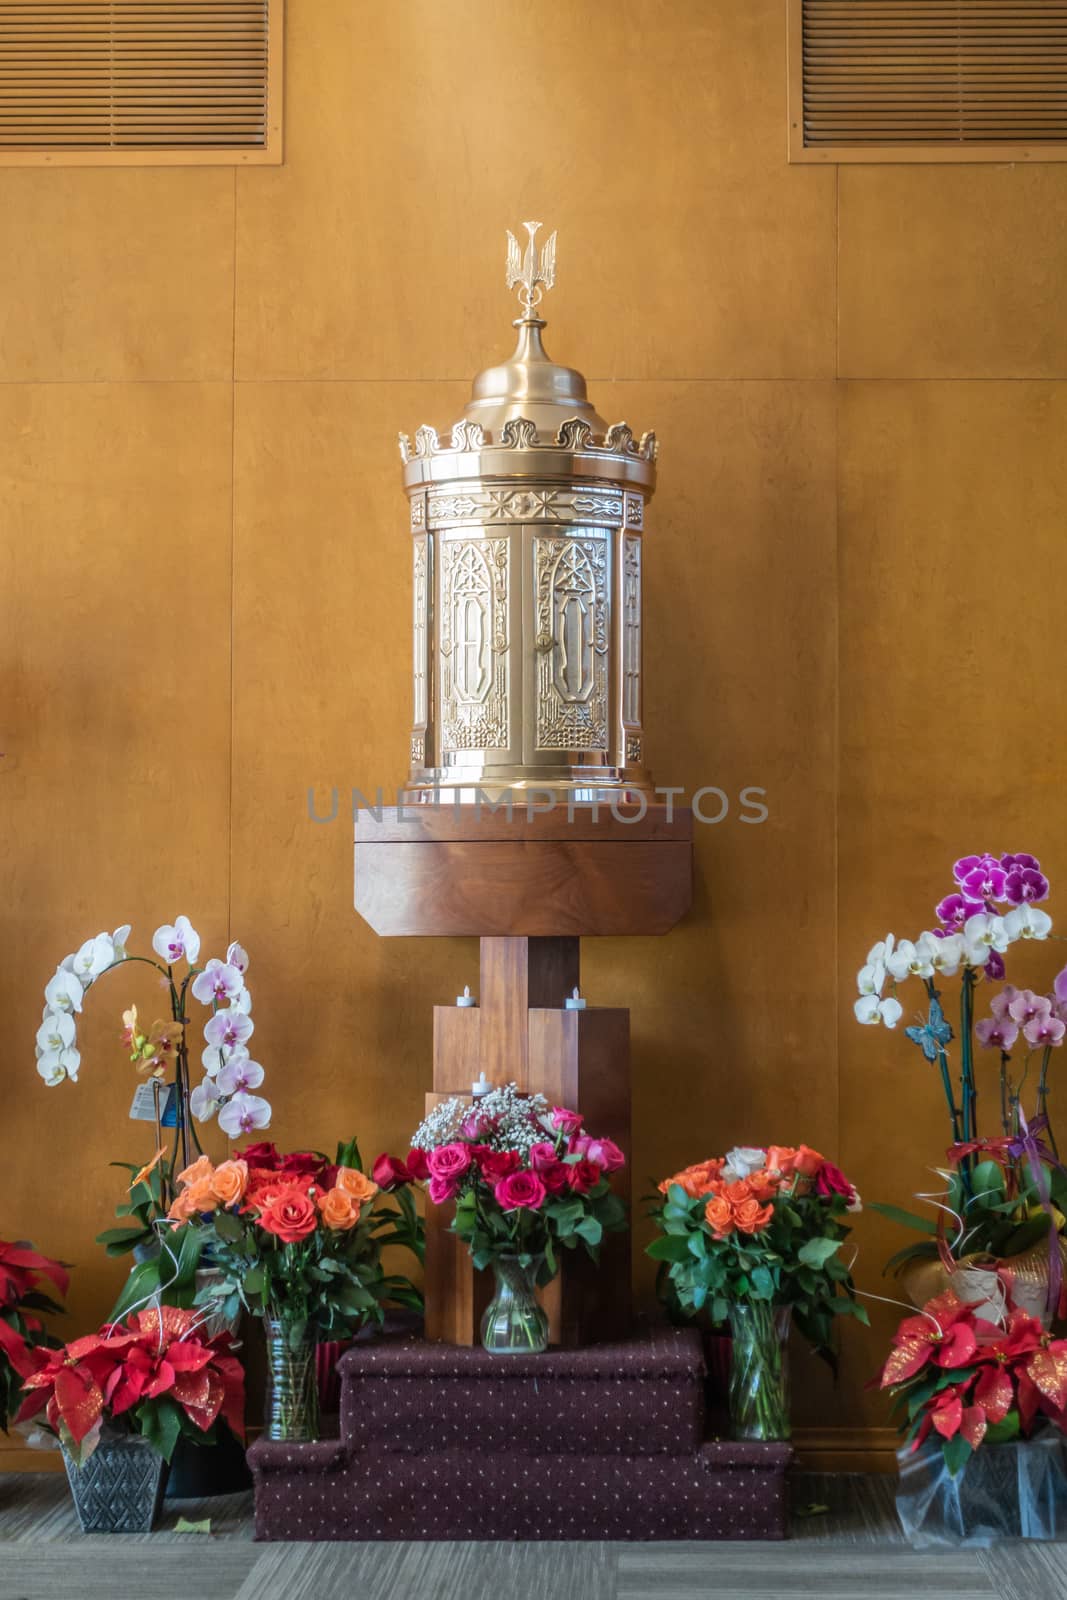 Garden Grove, California, USA - December 13, 2018: Crystal Christ Cathedral. Golden tabernacle in Blessed Sacramet Chapel against brown wooden wall. Many flowers up front.